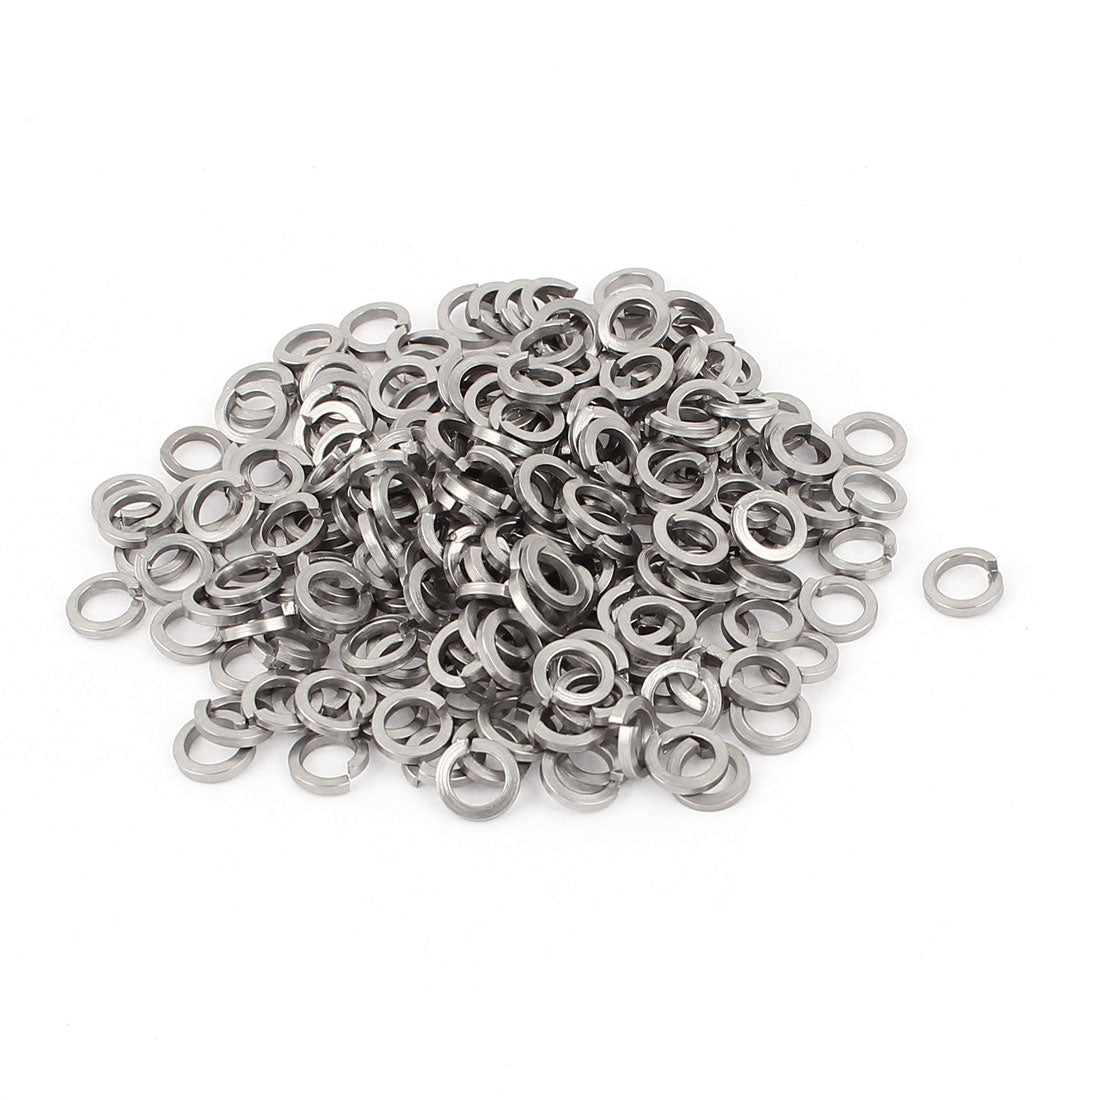 uxcell Uxcell 200pcs Stainless Steel M5 Spring Lock Washer Square Section Tool